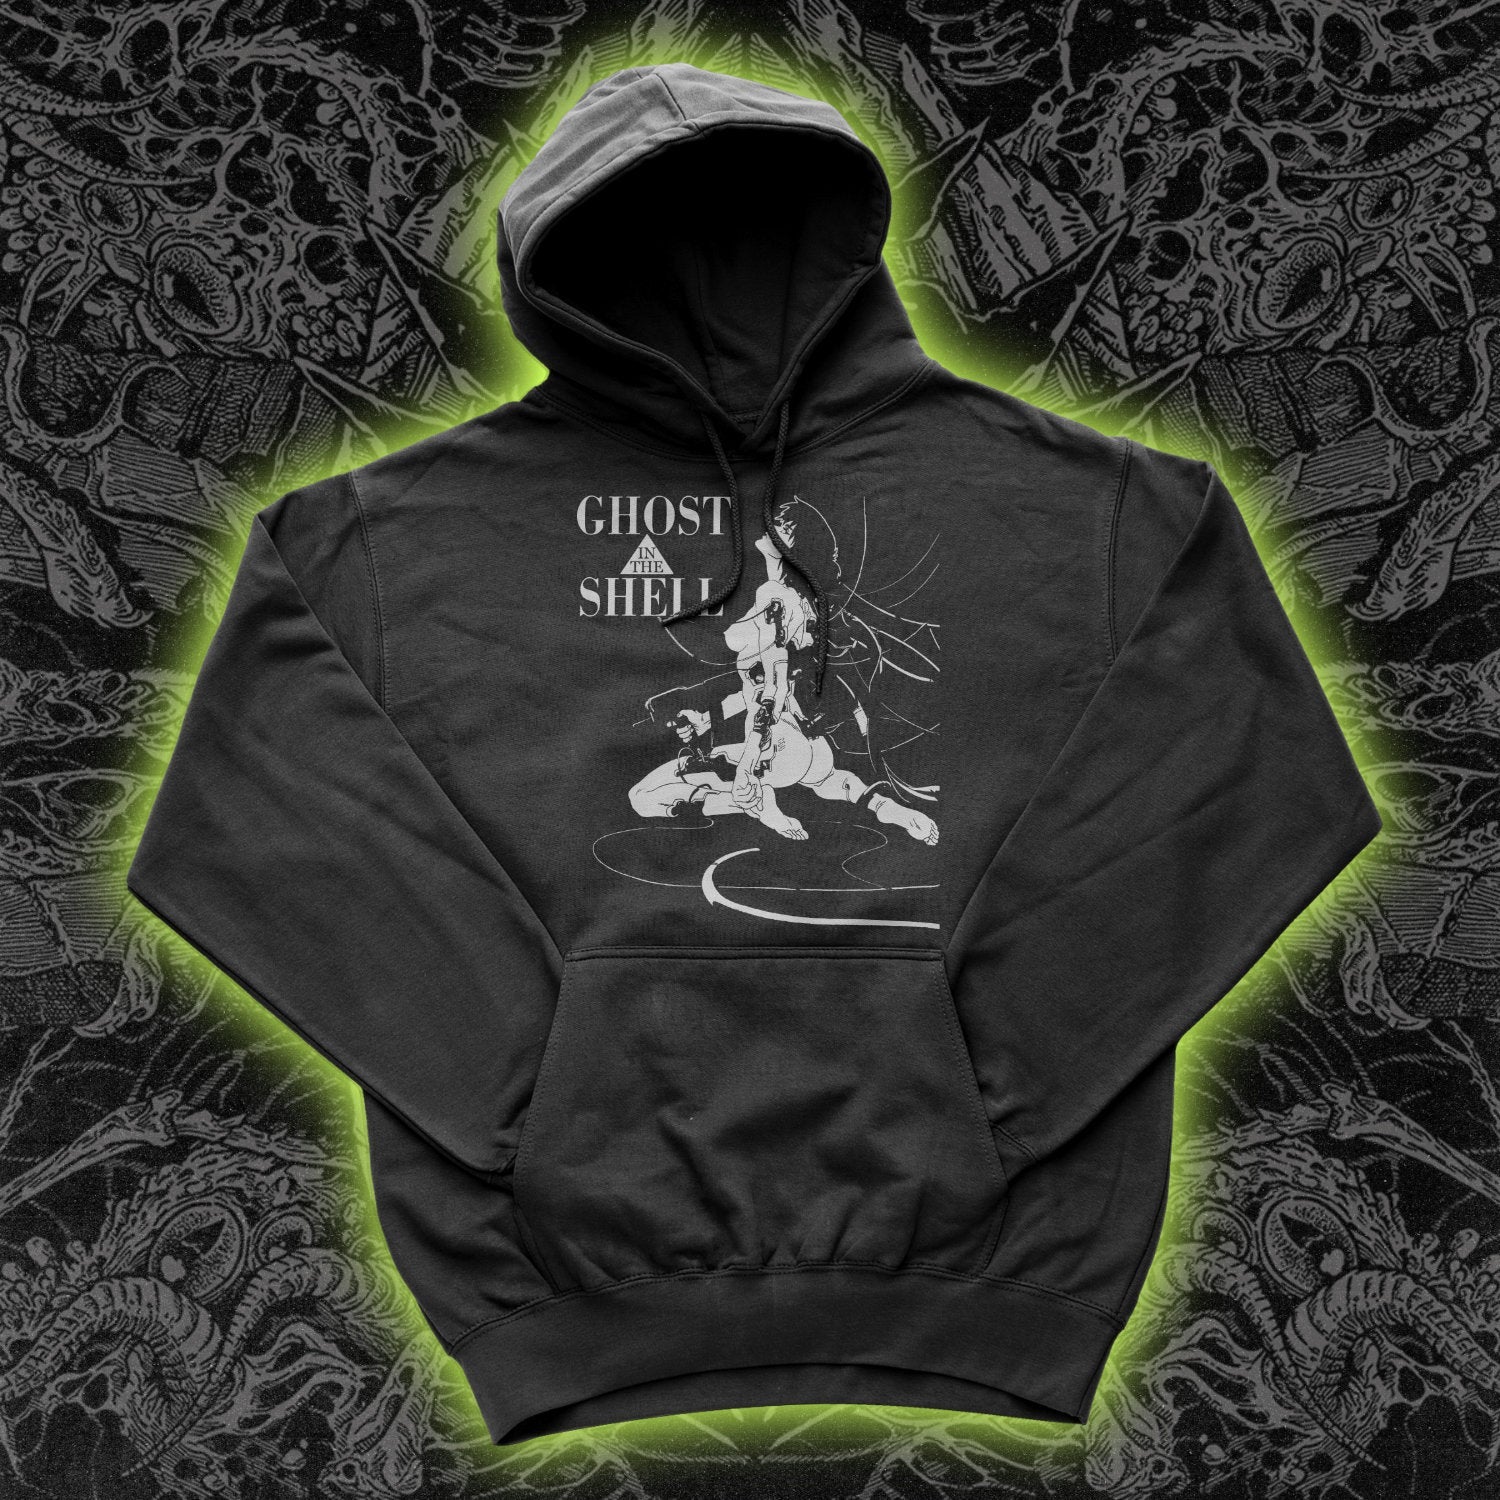 Ghost In The Shell Hoodie